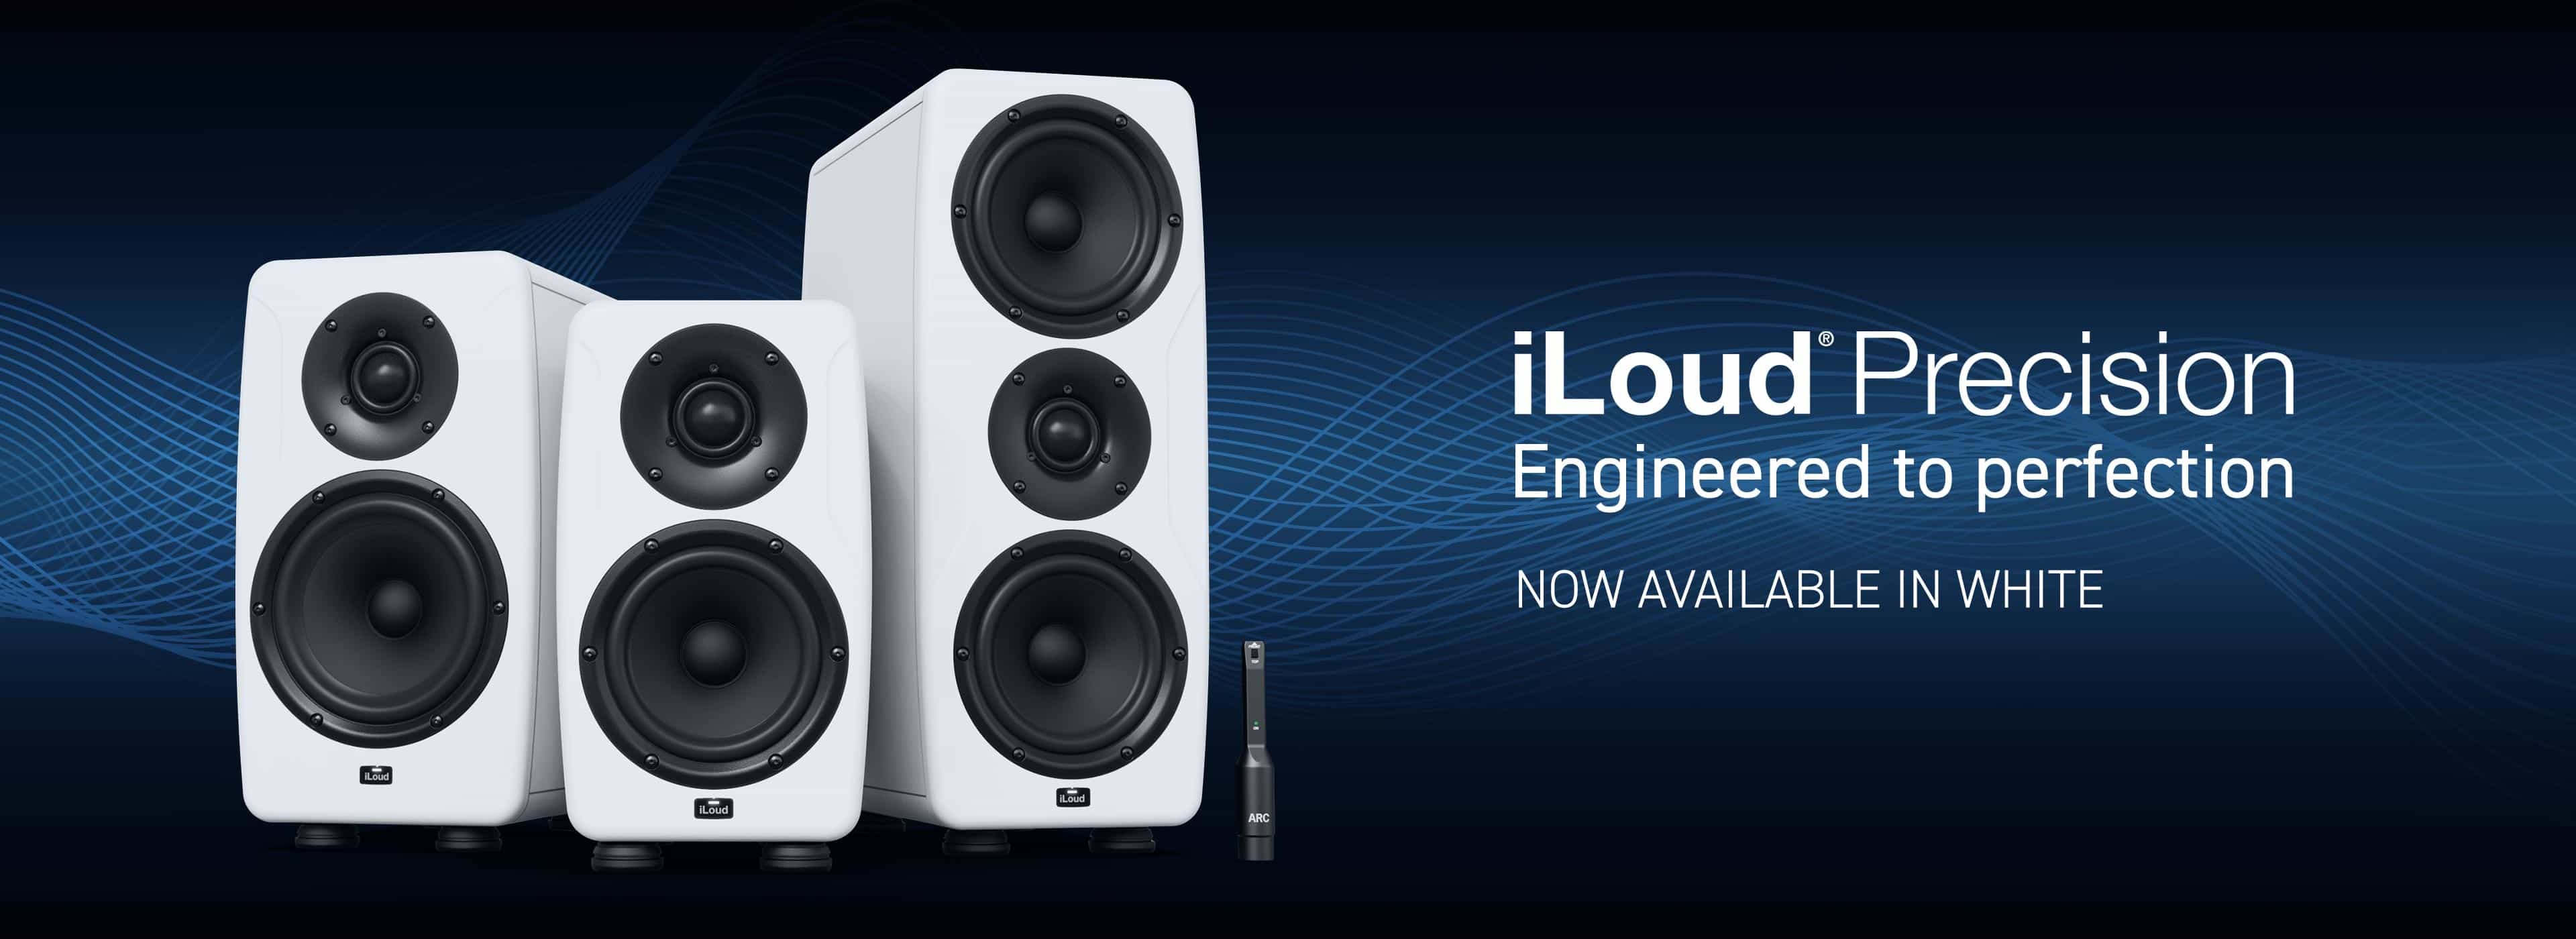 iLoud Precision.Now available in white. 